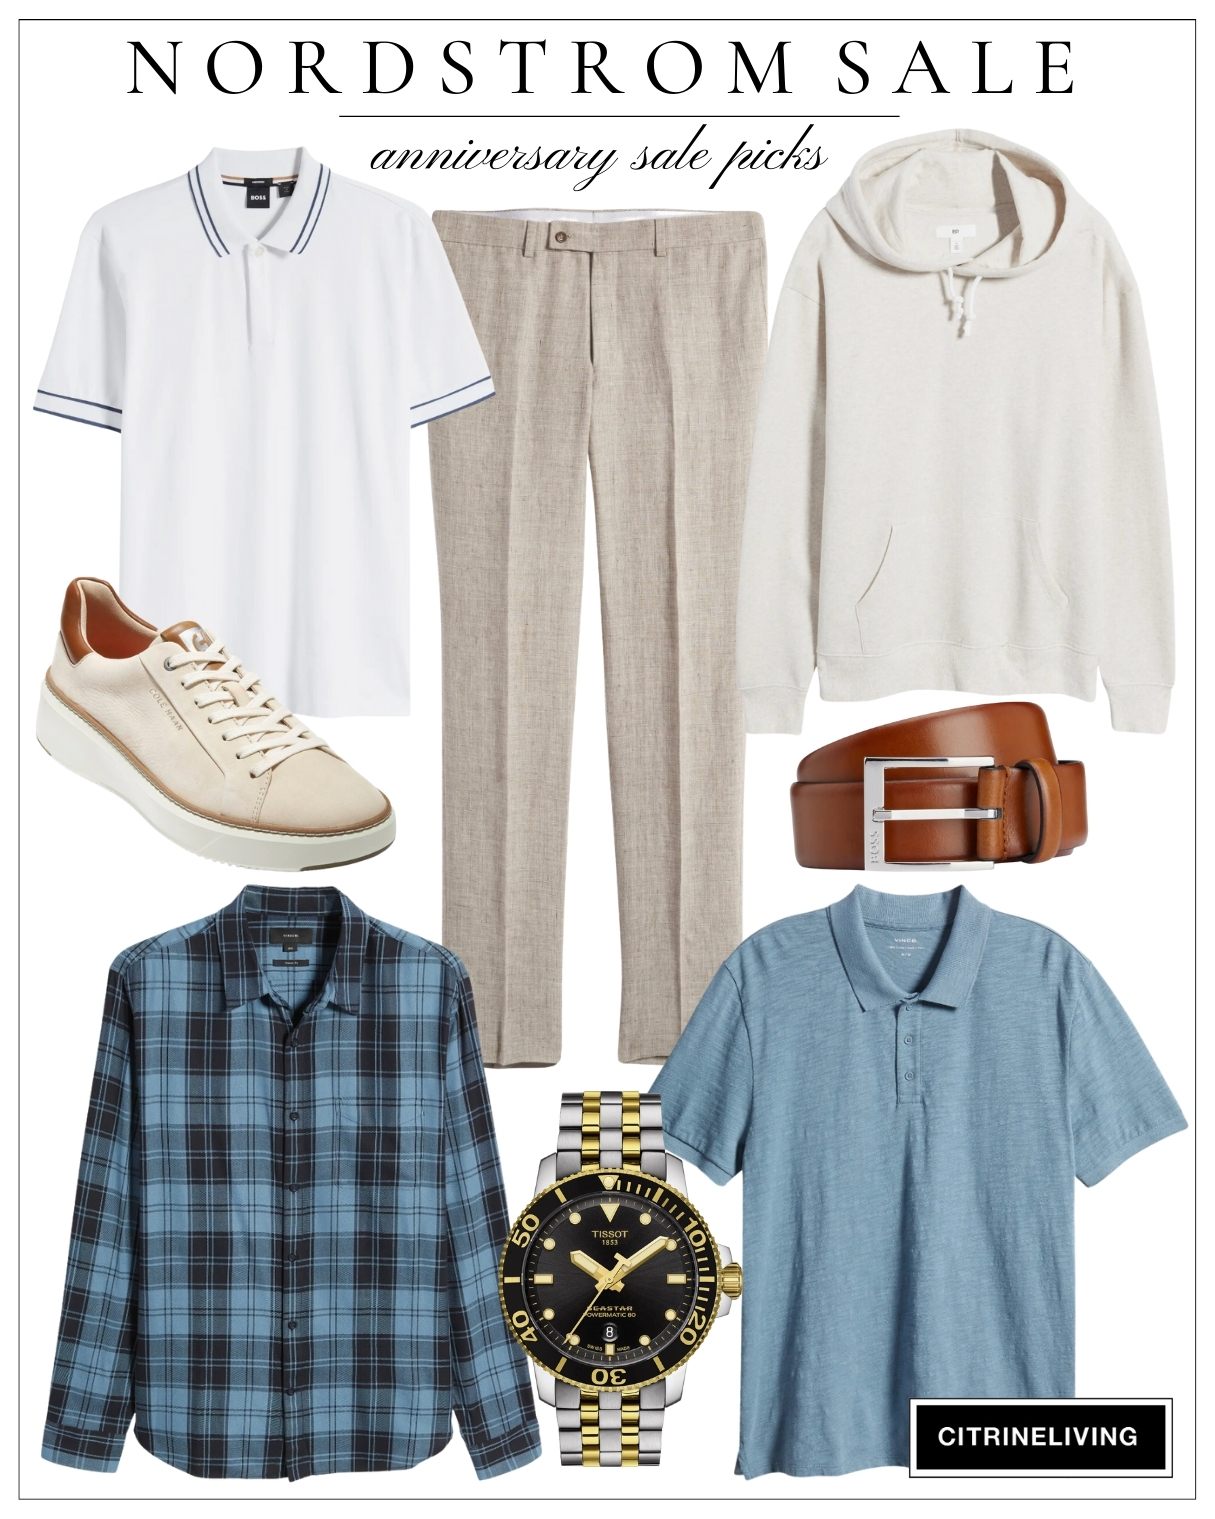 Men's fashion from Nordstrom